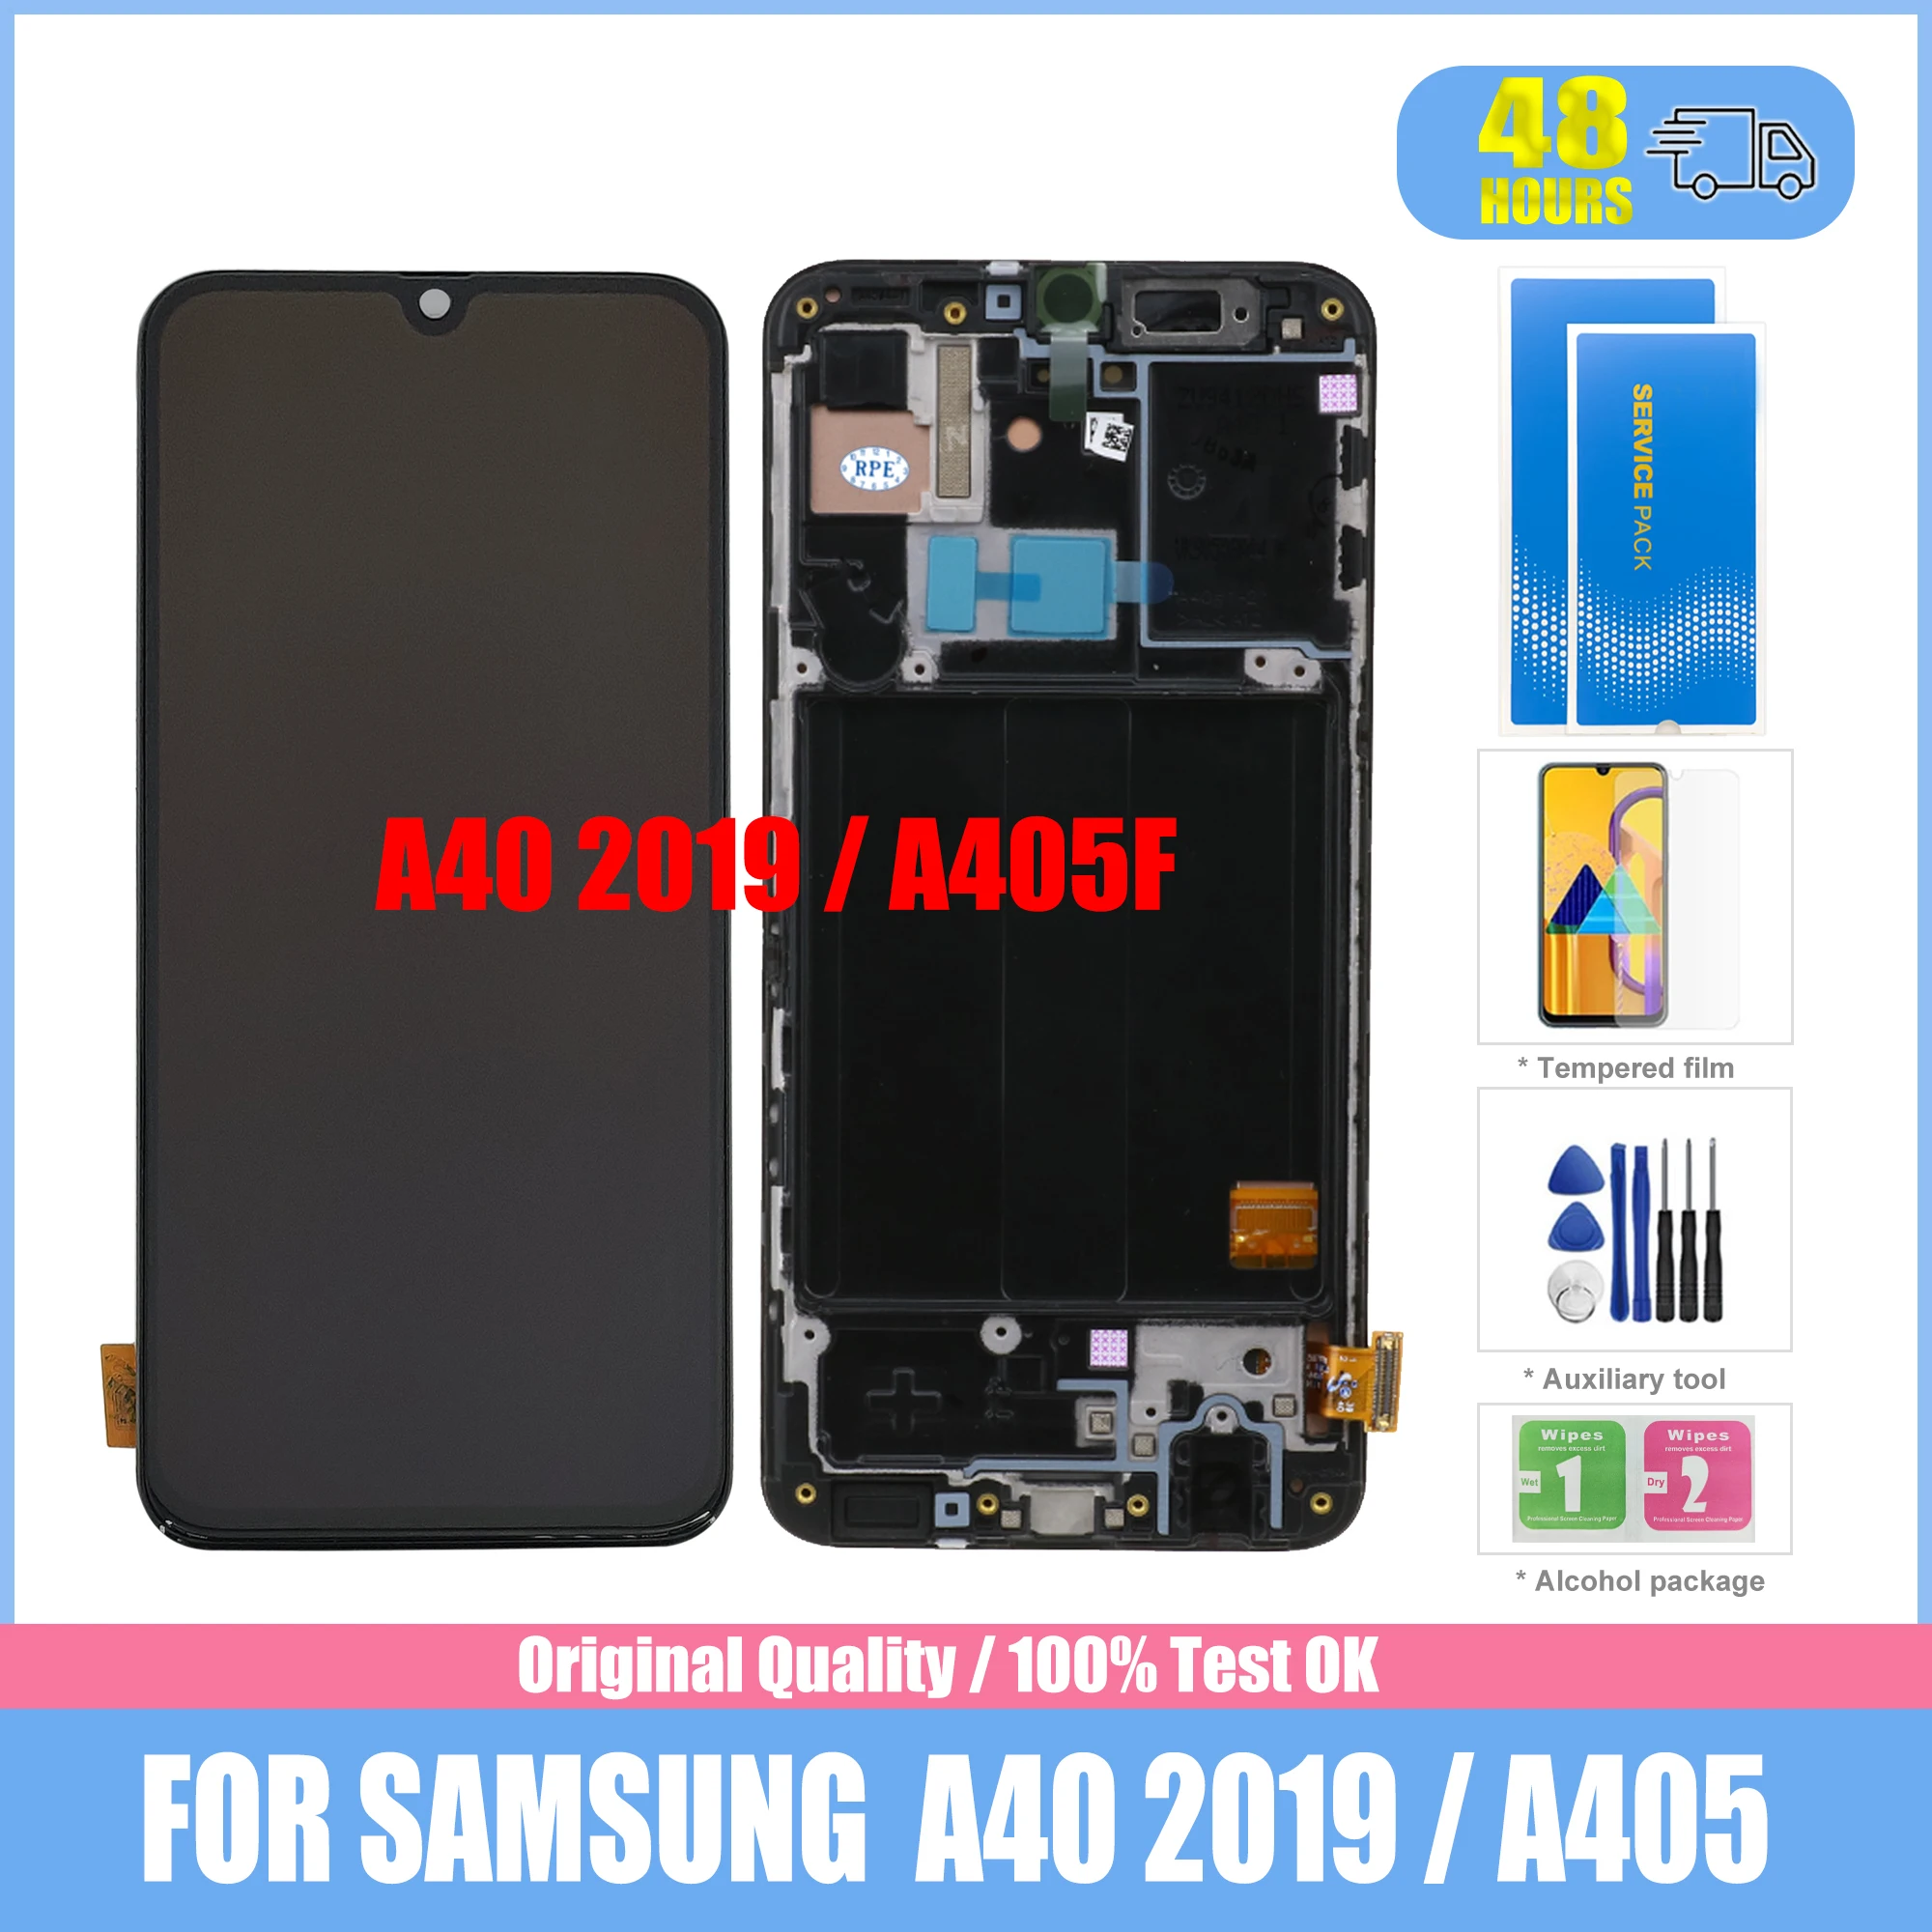 

Original Super AMOLED for Samsung A40 2019 A405 LCD Display Touch Screen Digitizer with frame repair part for SM-A40 A405F/FN/DS